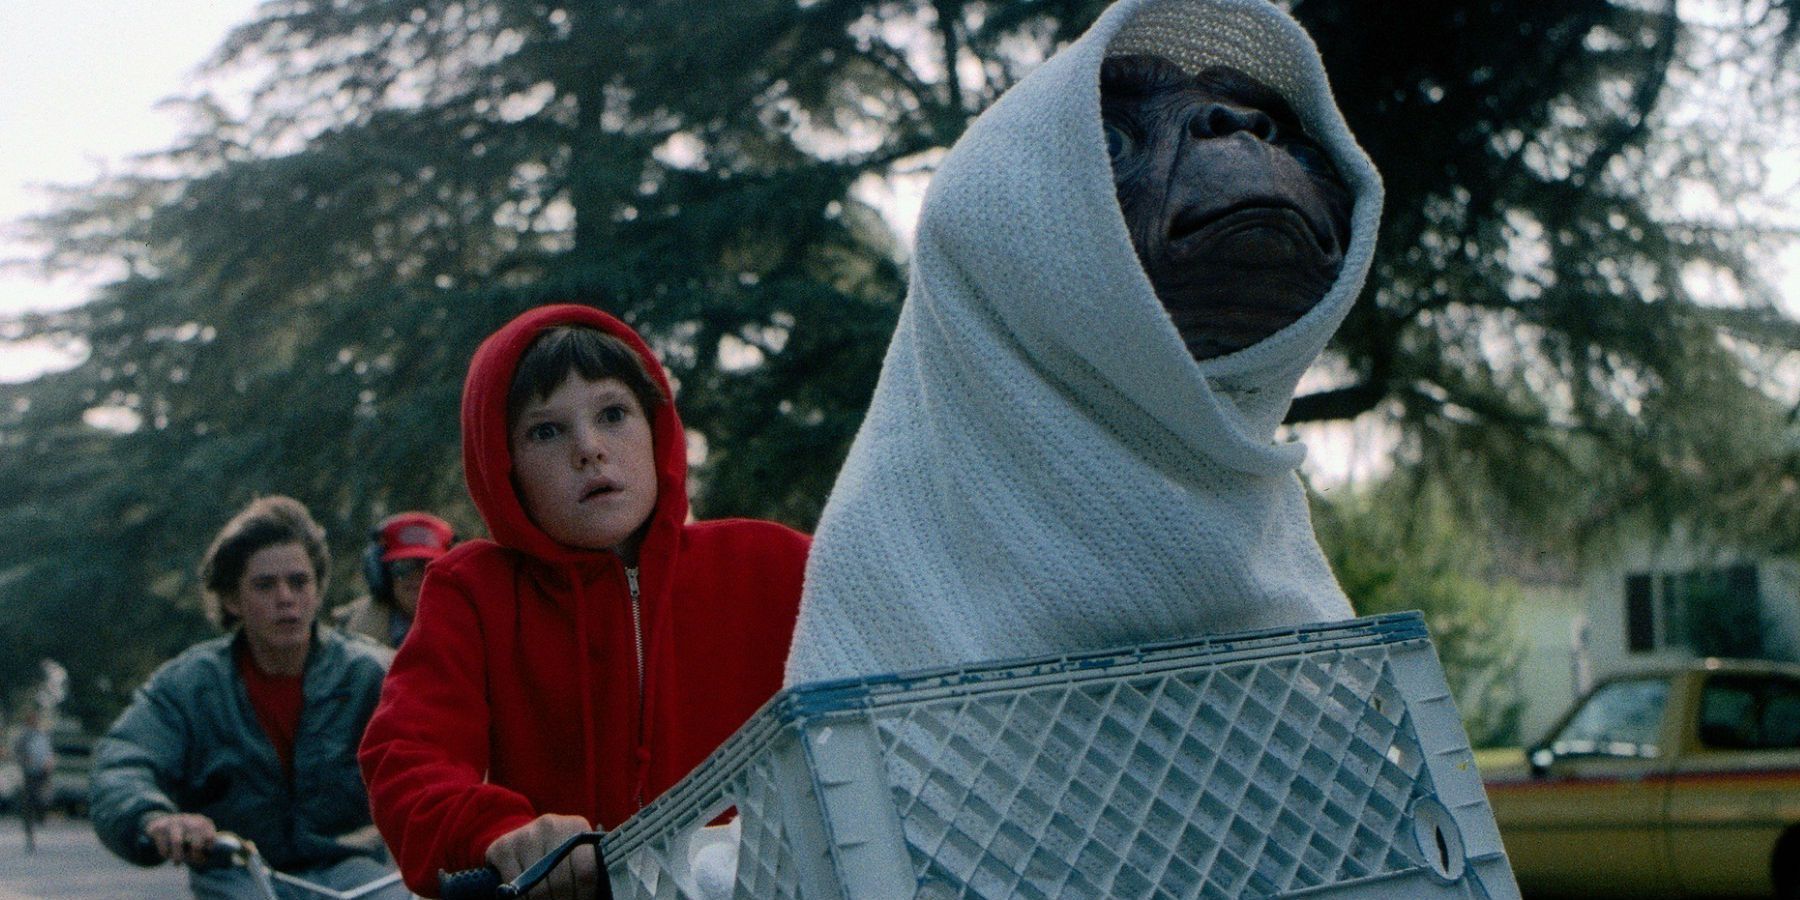 Fun Facts About E.T. The Extra Terrestrial